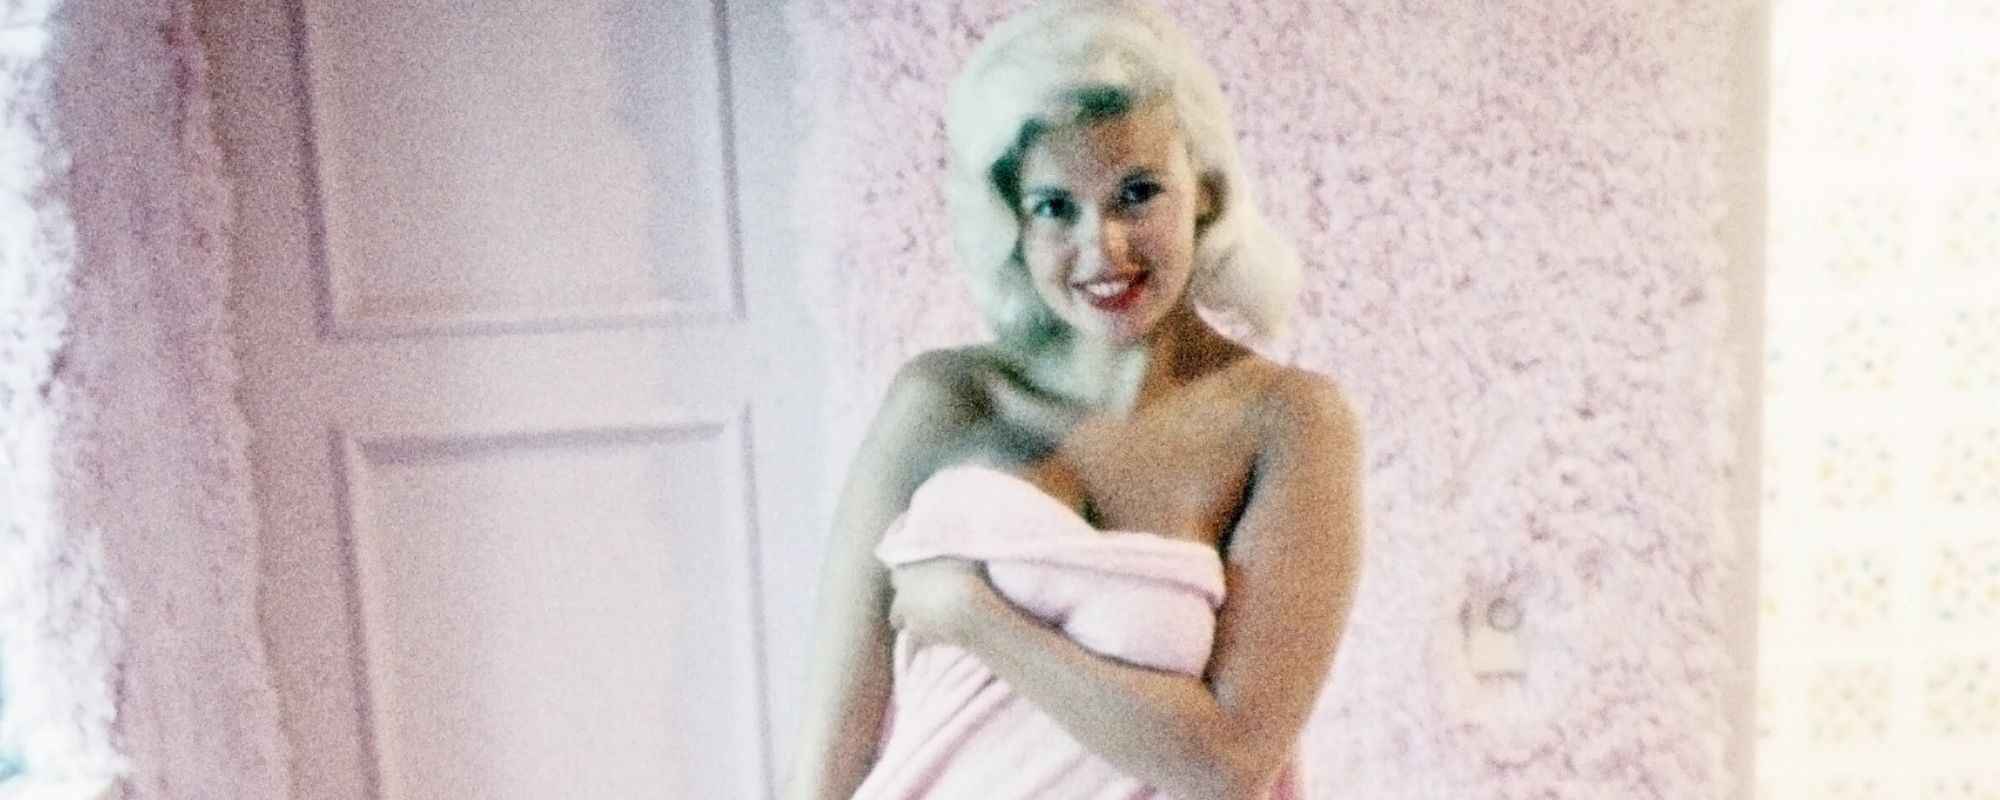 amanda perry share jayne mansfield playboy pictures photos